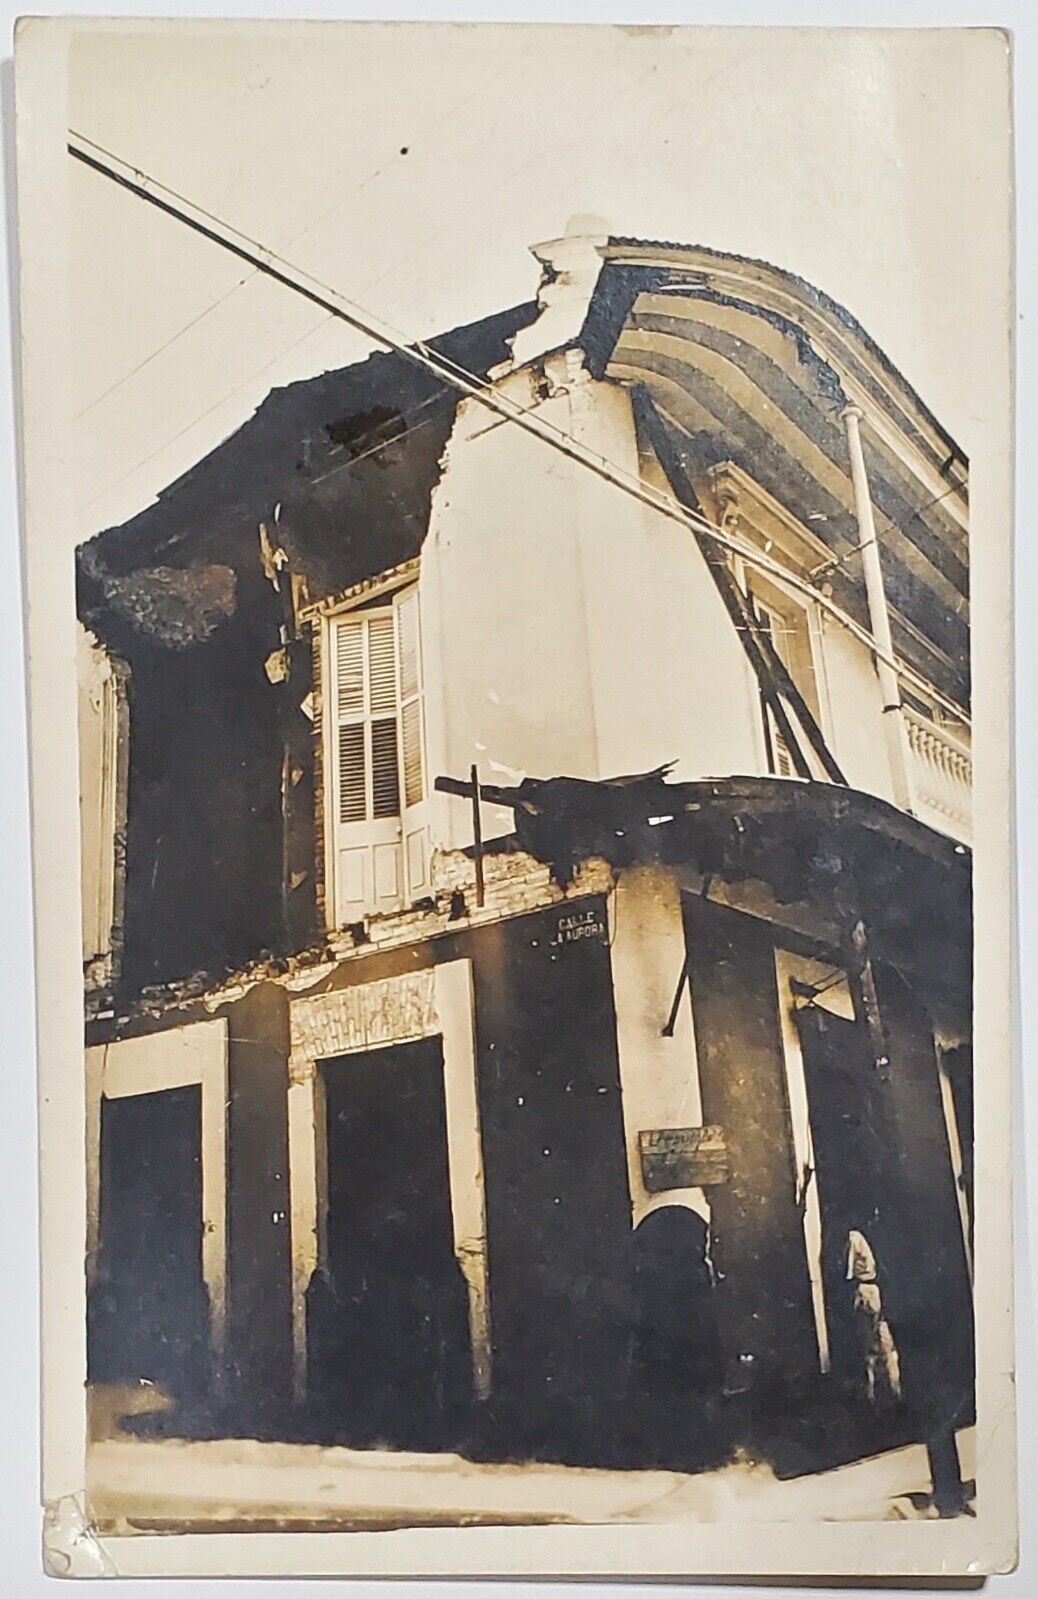 Mexico RPPC View of Damaged Building on Aurora Street Real Photo Postcard Z16